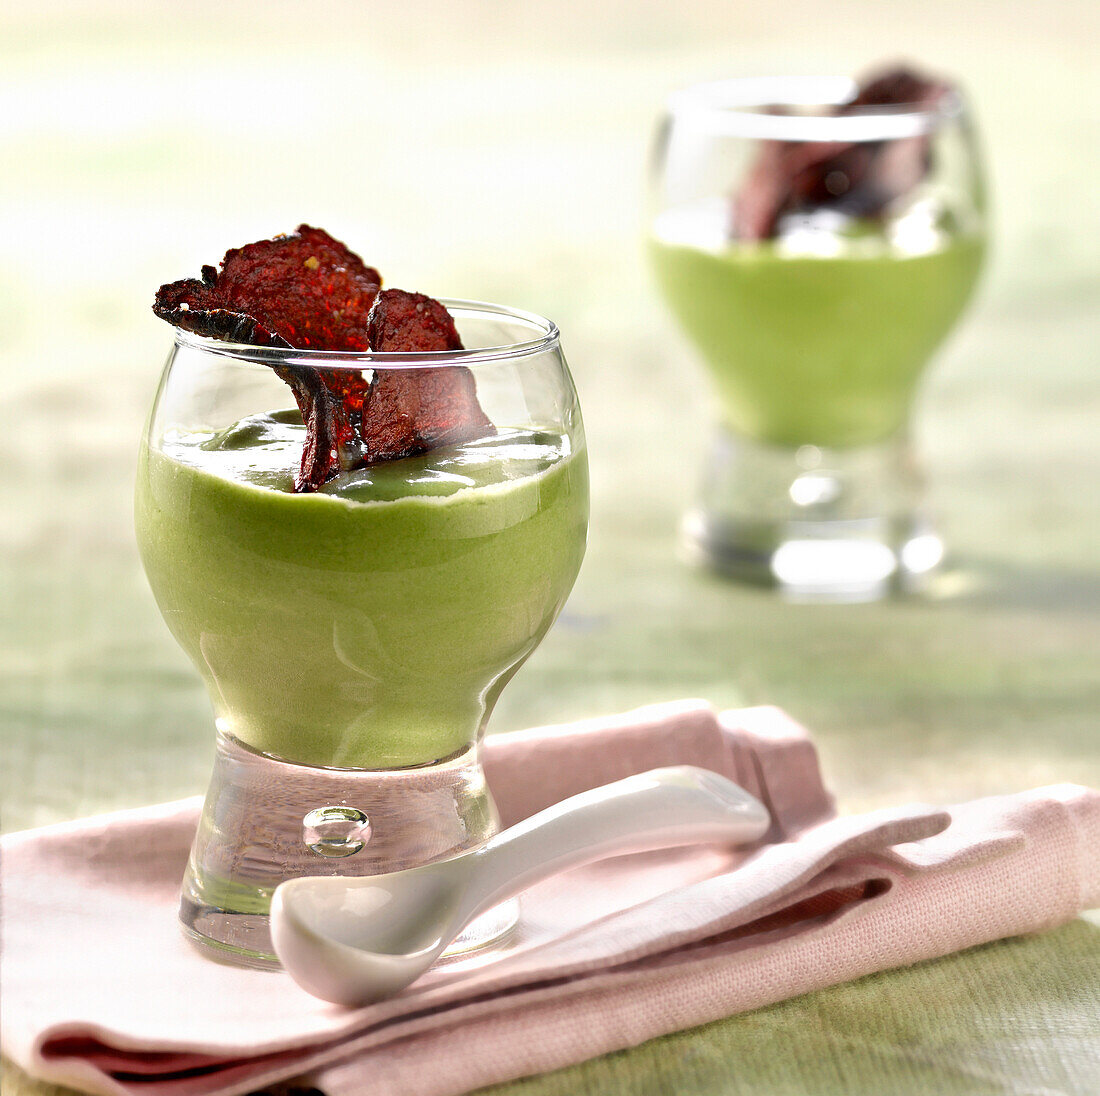 Cream of spinach with beetroot crisps